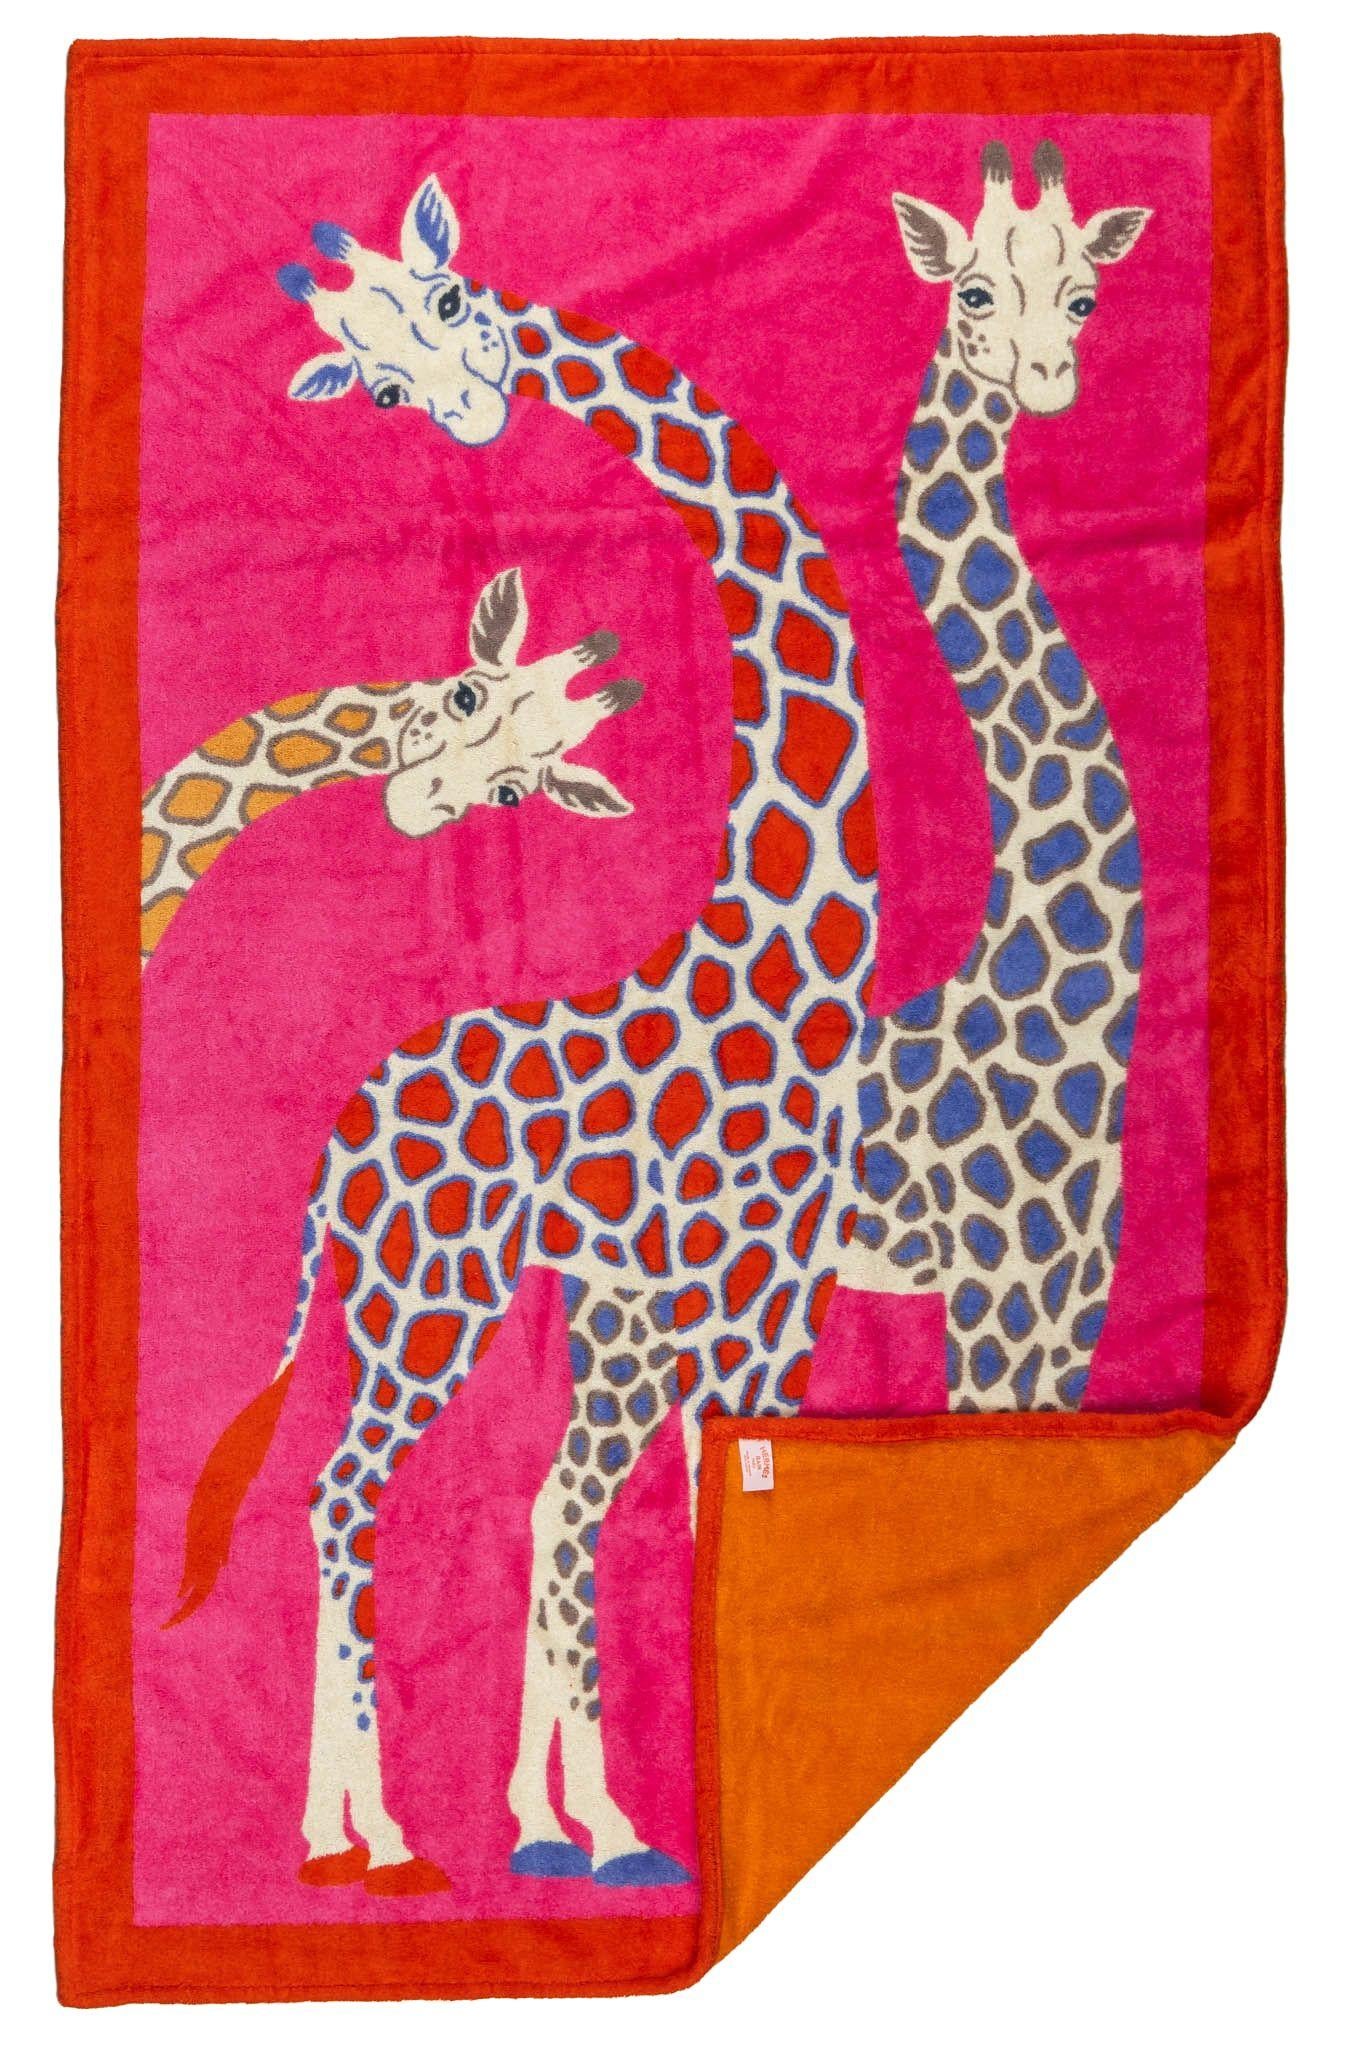 Hermès new cotton beach towel in fuchsia and red color way with giraffes design. Comes with original box.